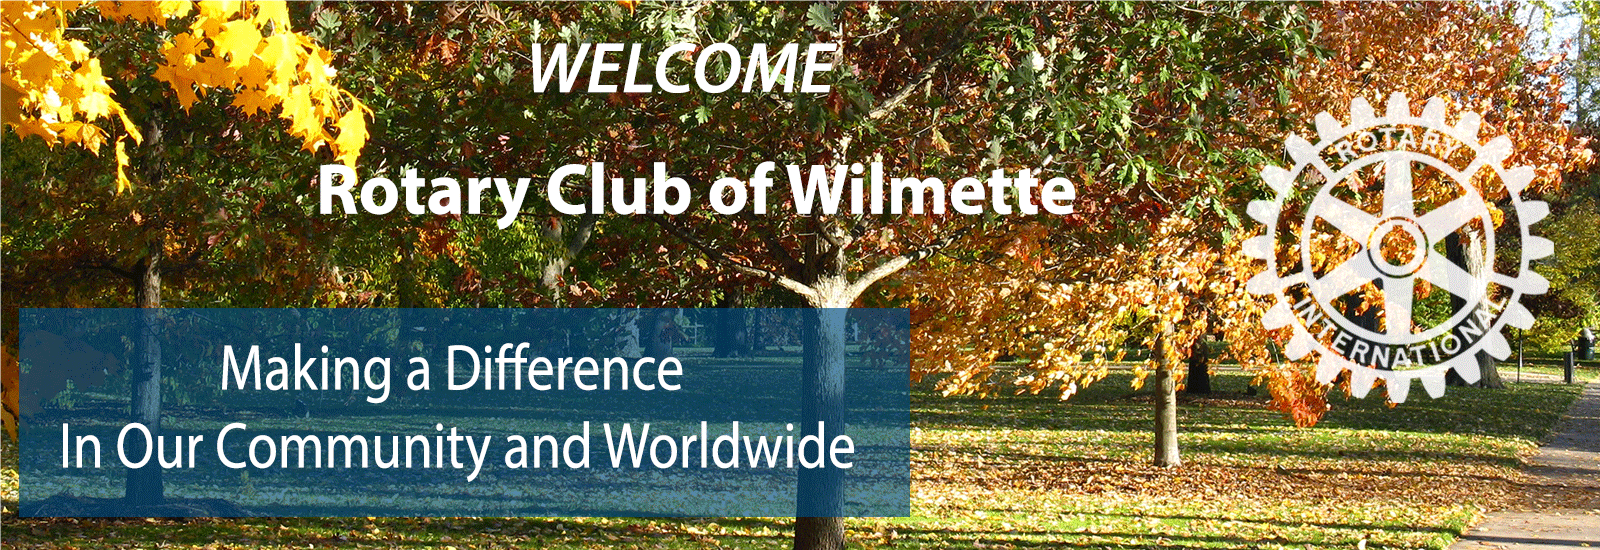 Wilmette-Rotary-v4.png